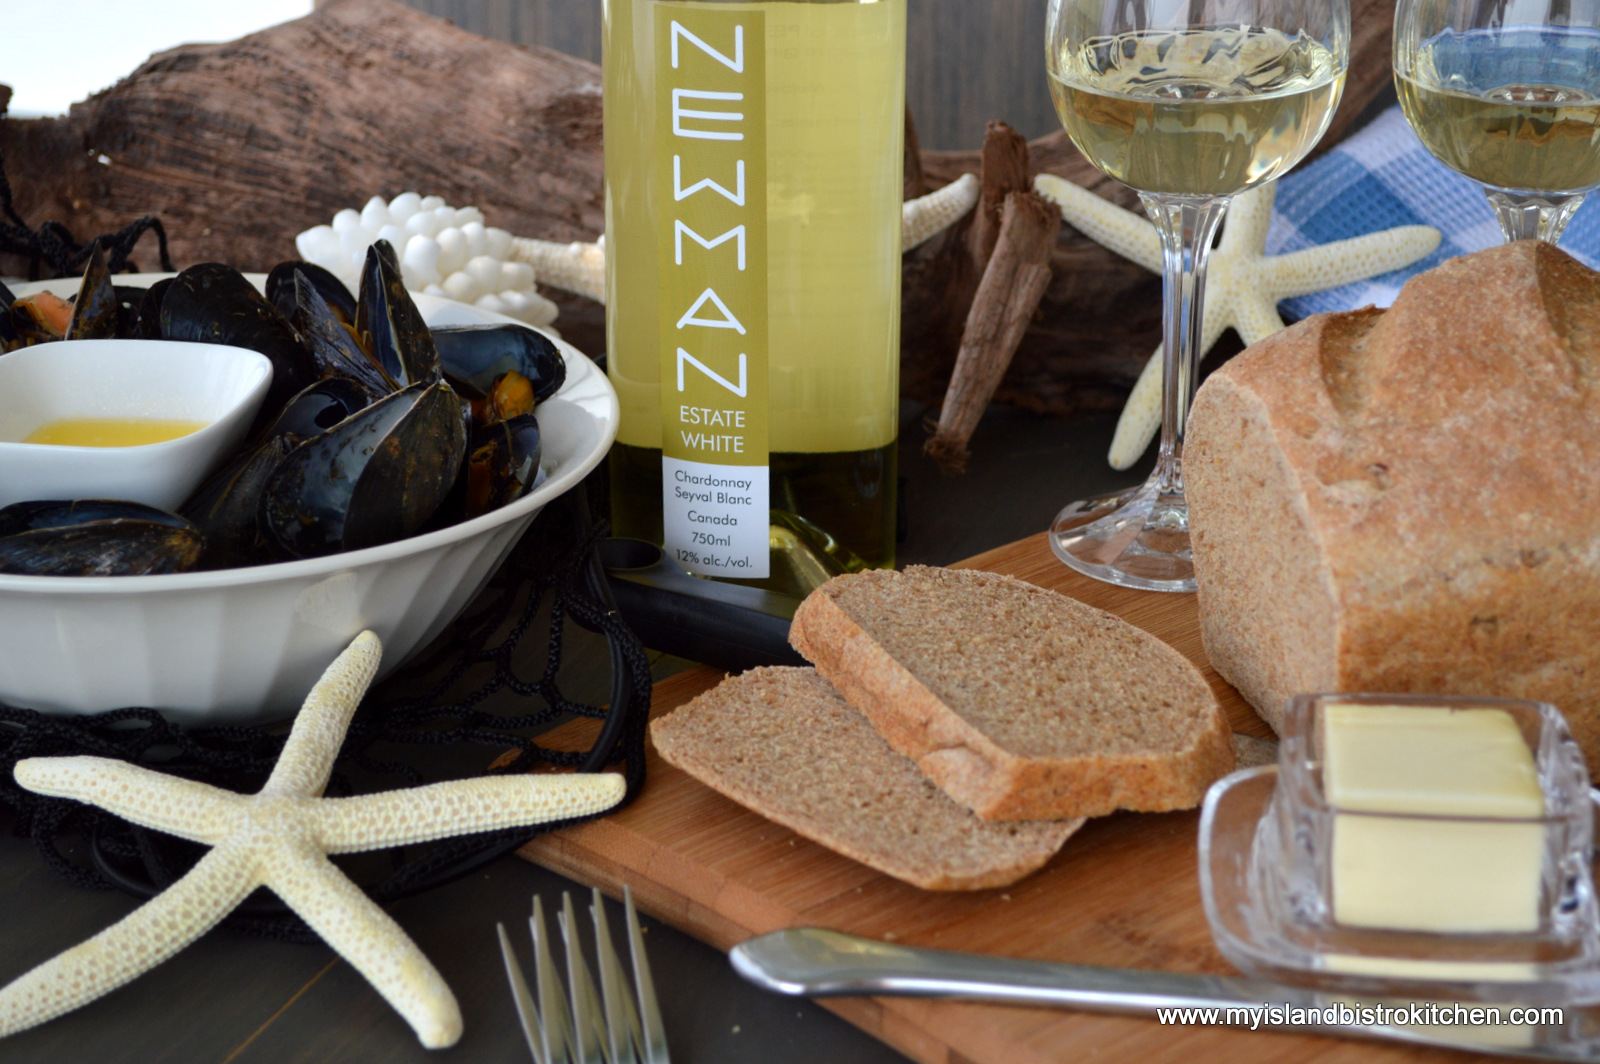 Bowl of Island Blue Mussels, Bottle of PEI produced wine, and a loaf of multigrain bread